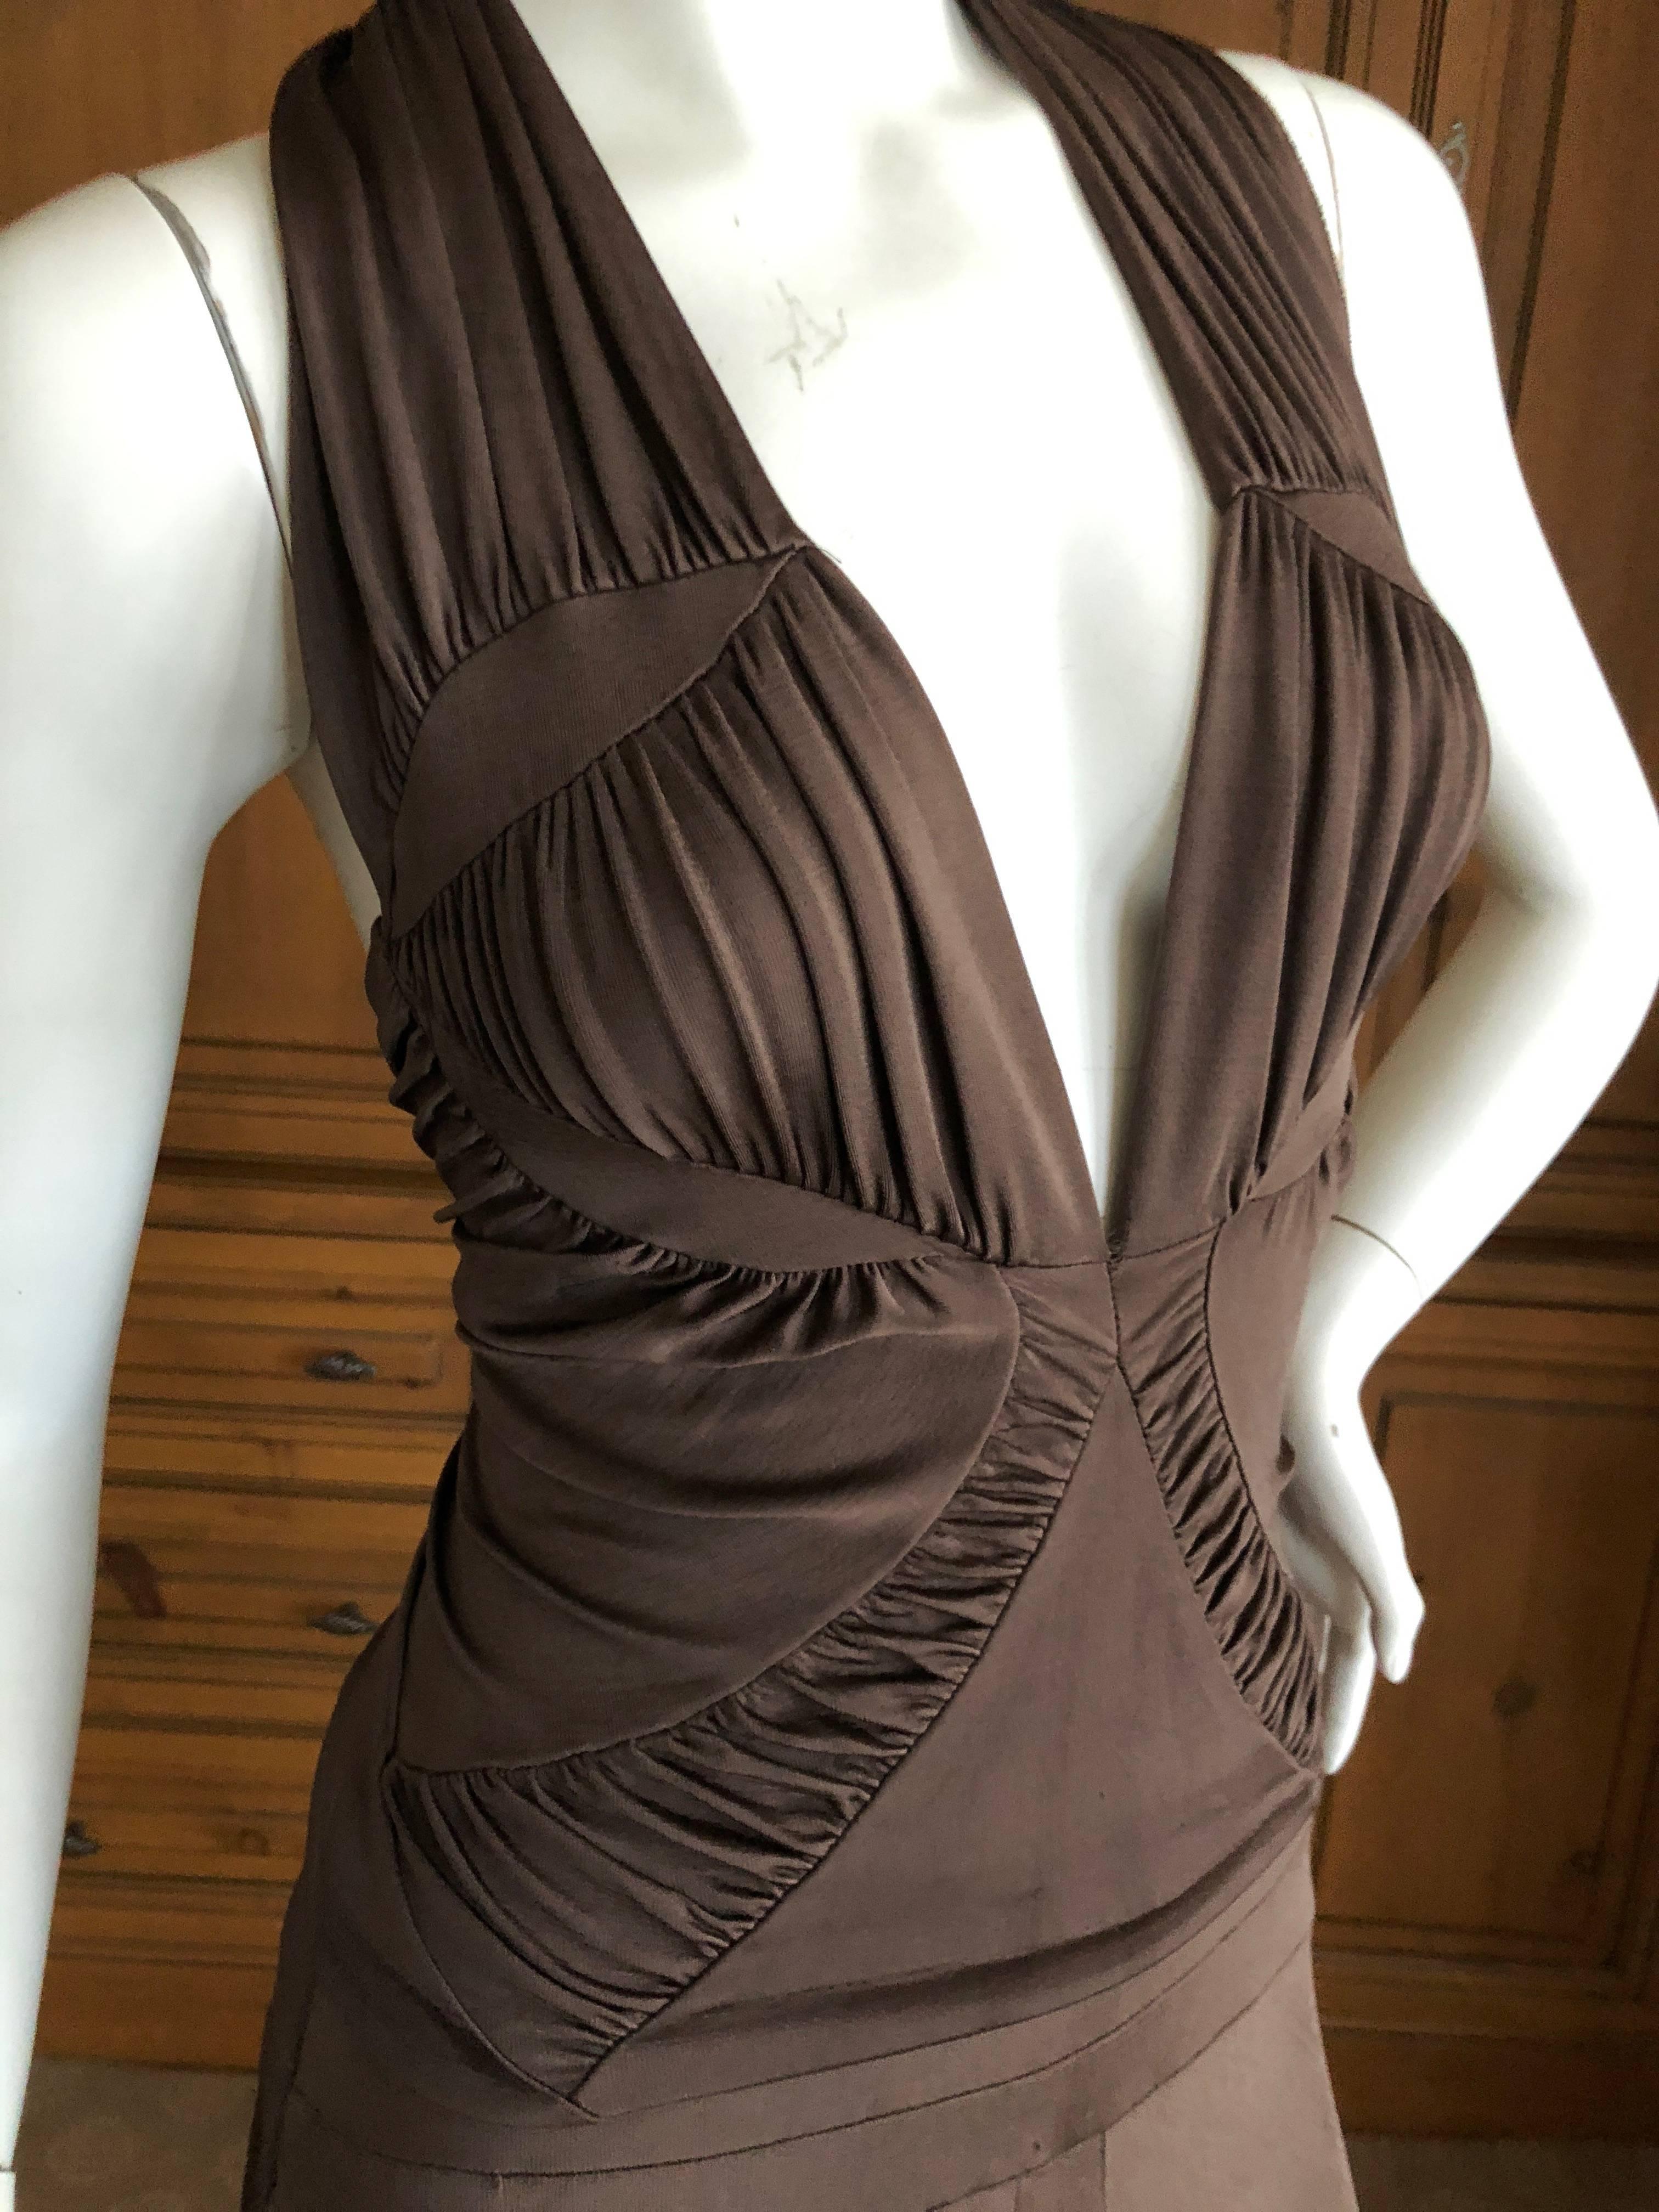 Yves Saint Laurent by Tom Ford Brown Ruched Two Piece Dress   In Excellent Condition For Sale In Cloverdale, CA